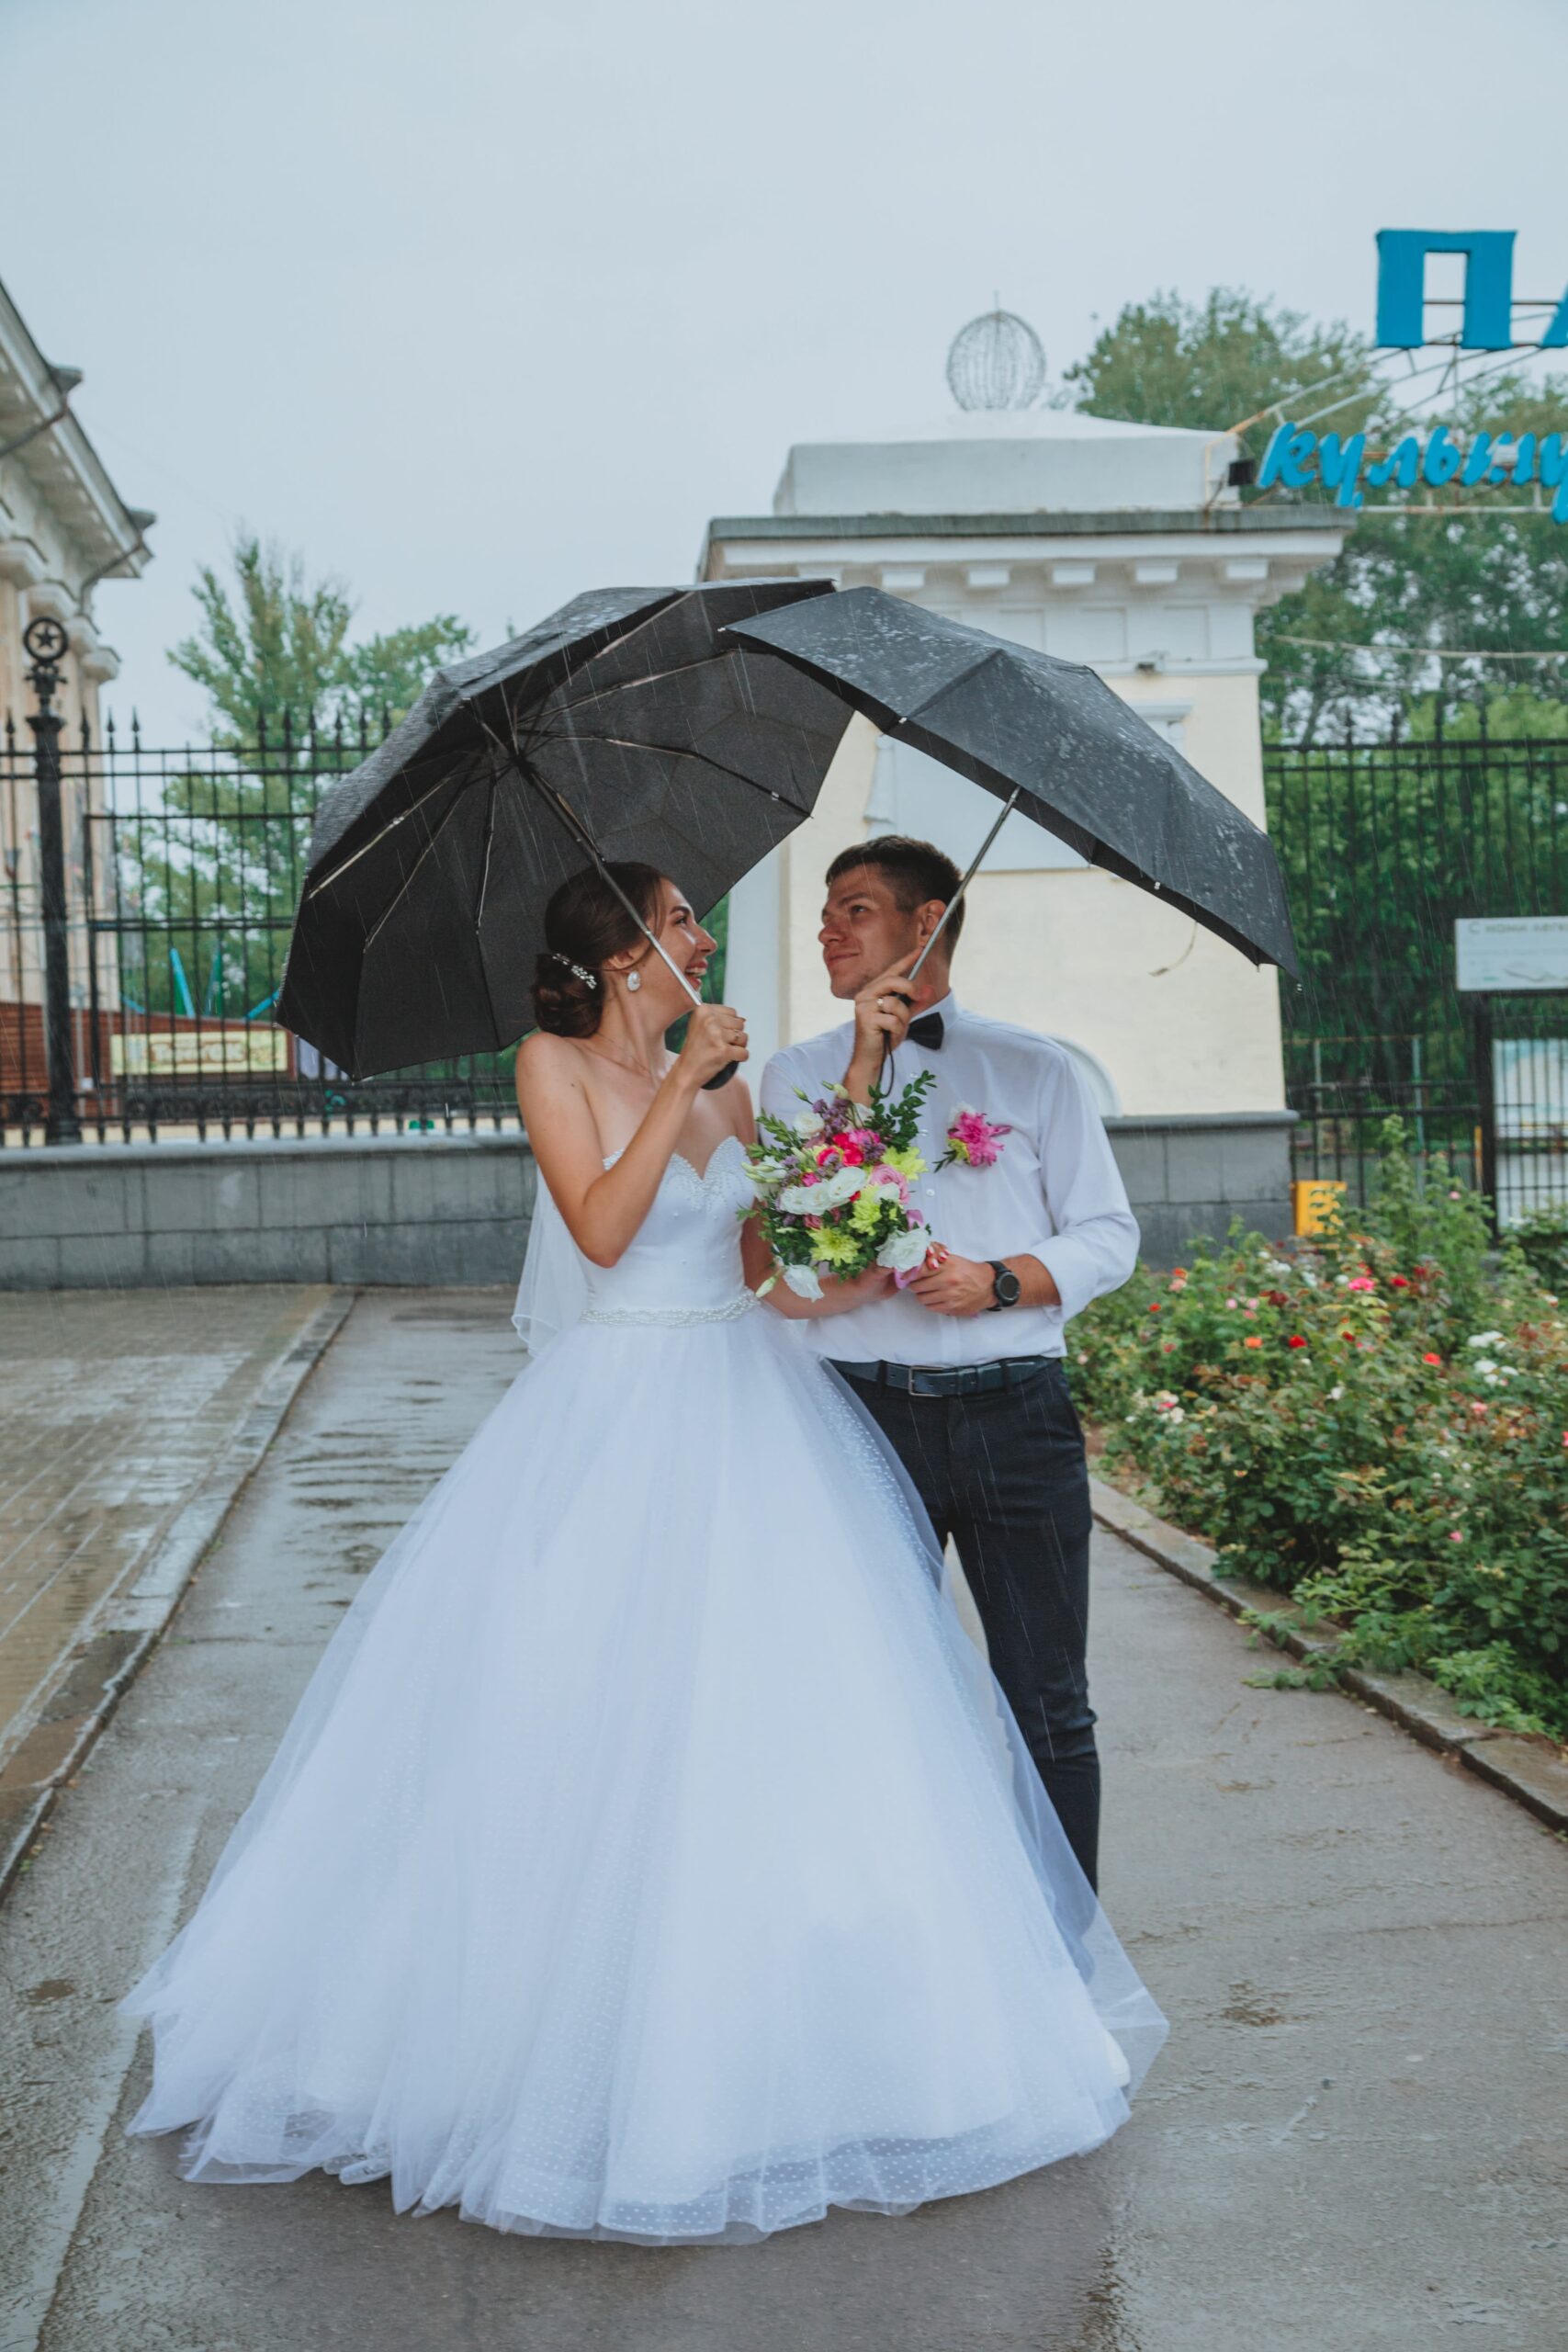 Making a weather plan for rain on your wedding day